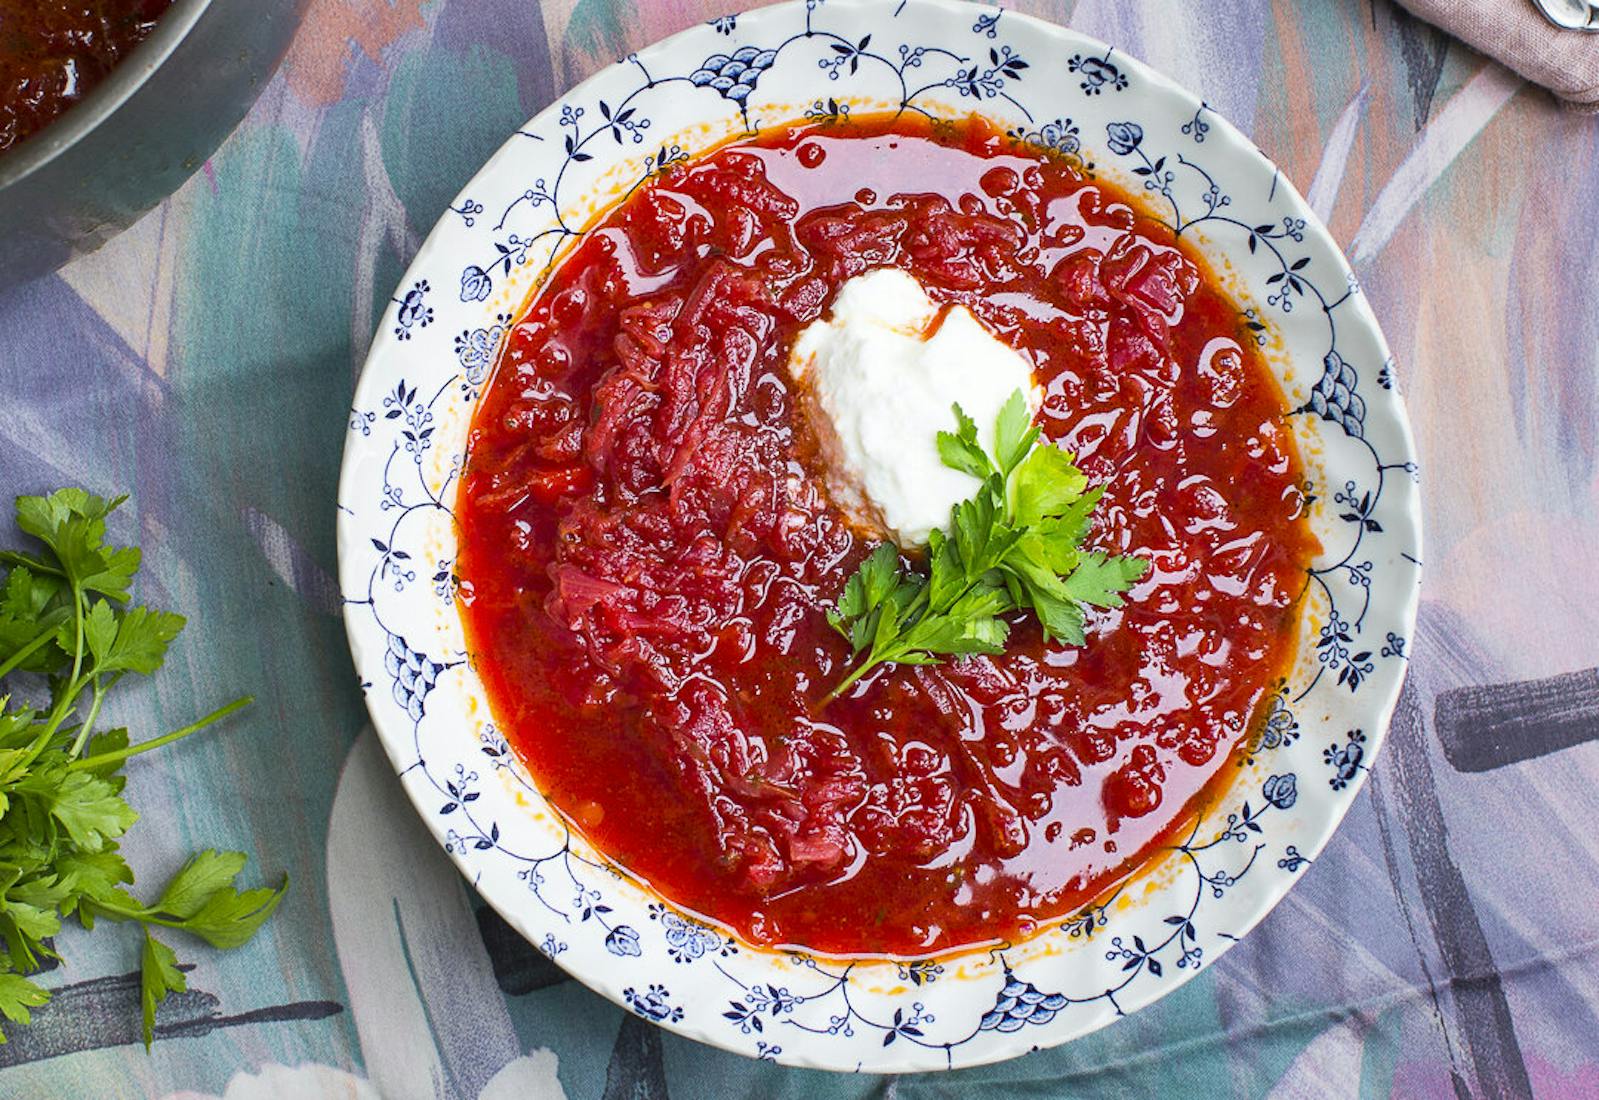 Borscht with dollop of sour cream and parsley alongside vegetarian borscht atop colorful tablecloth.